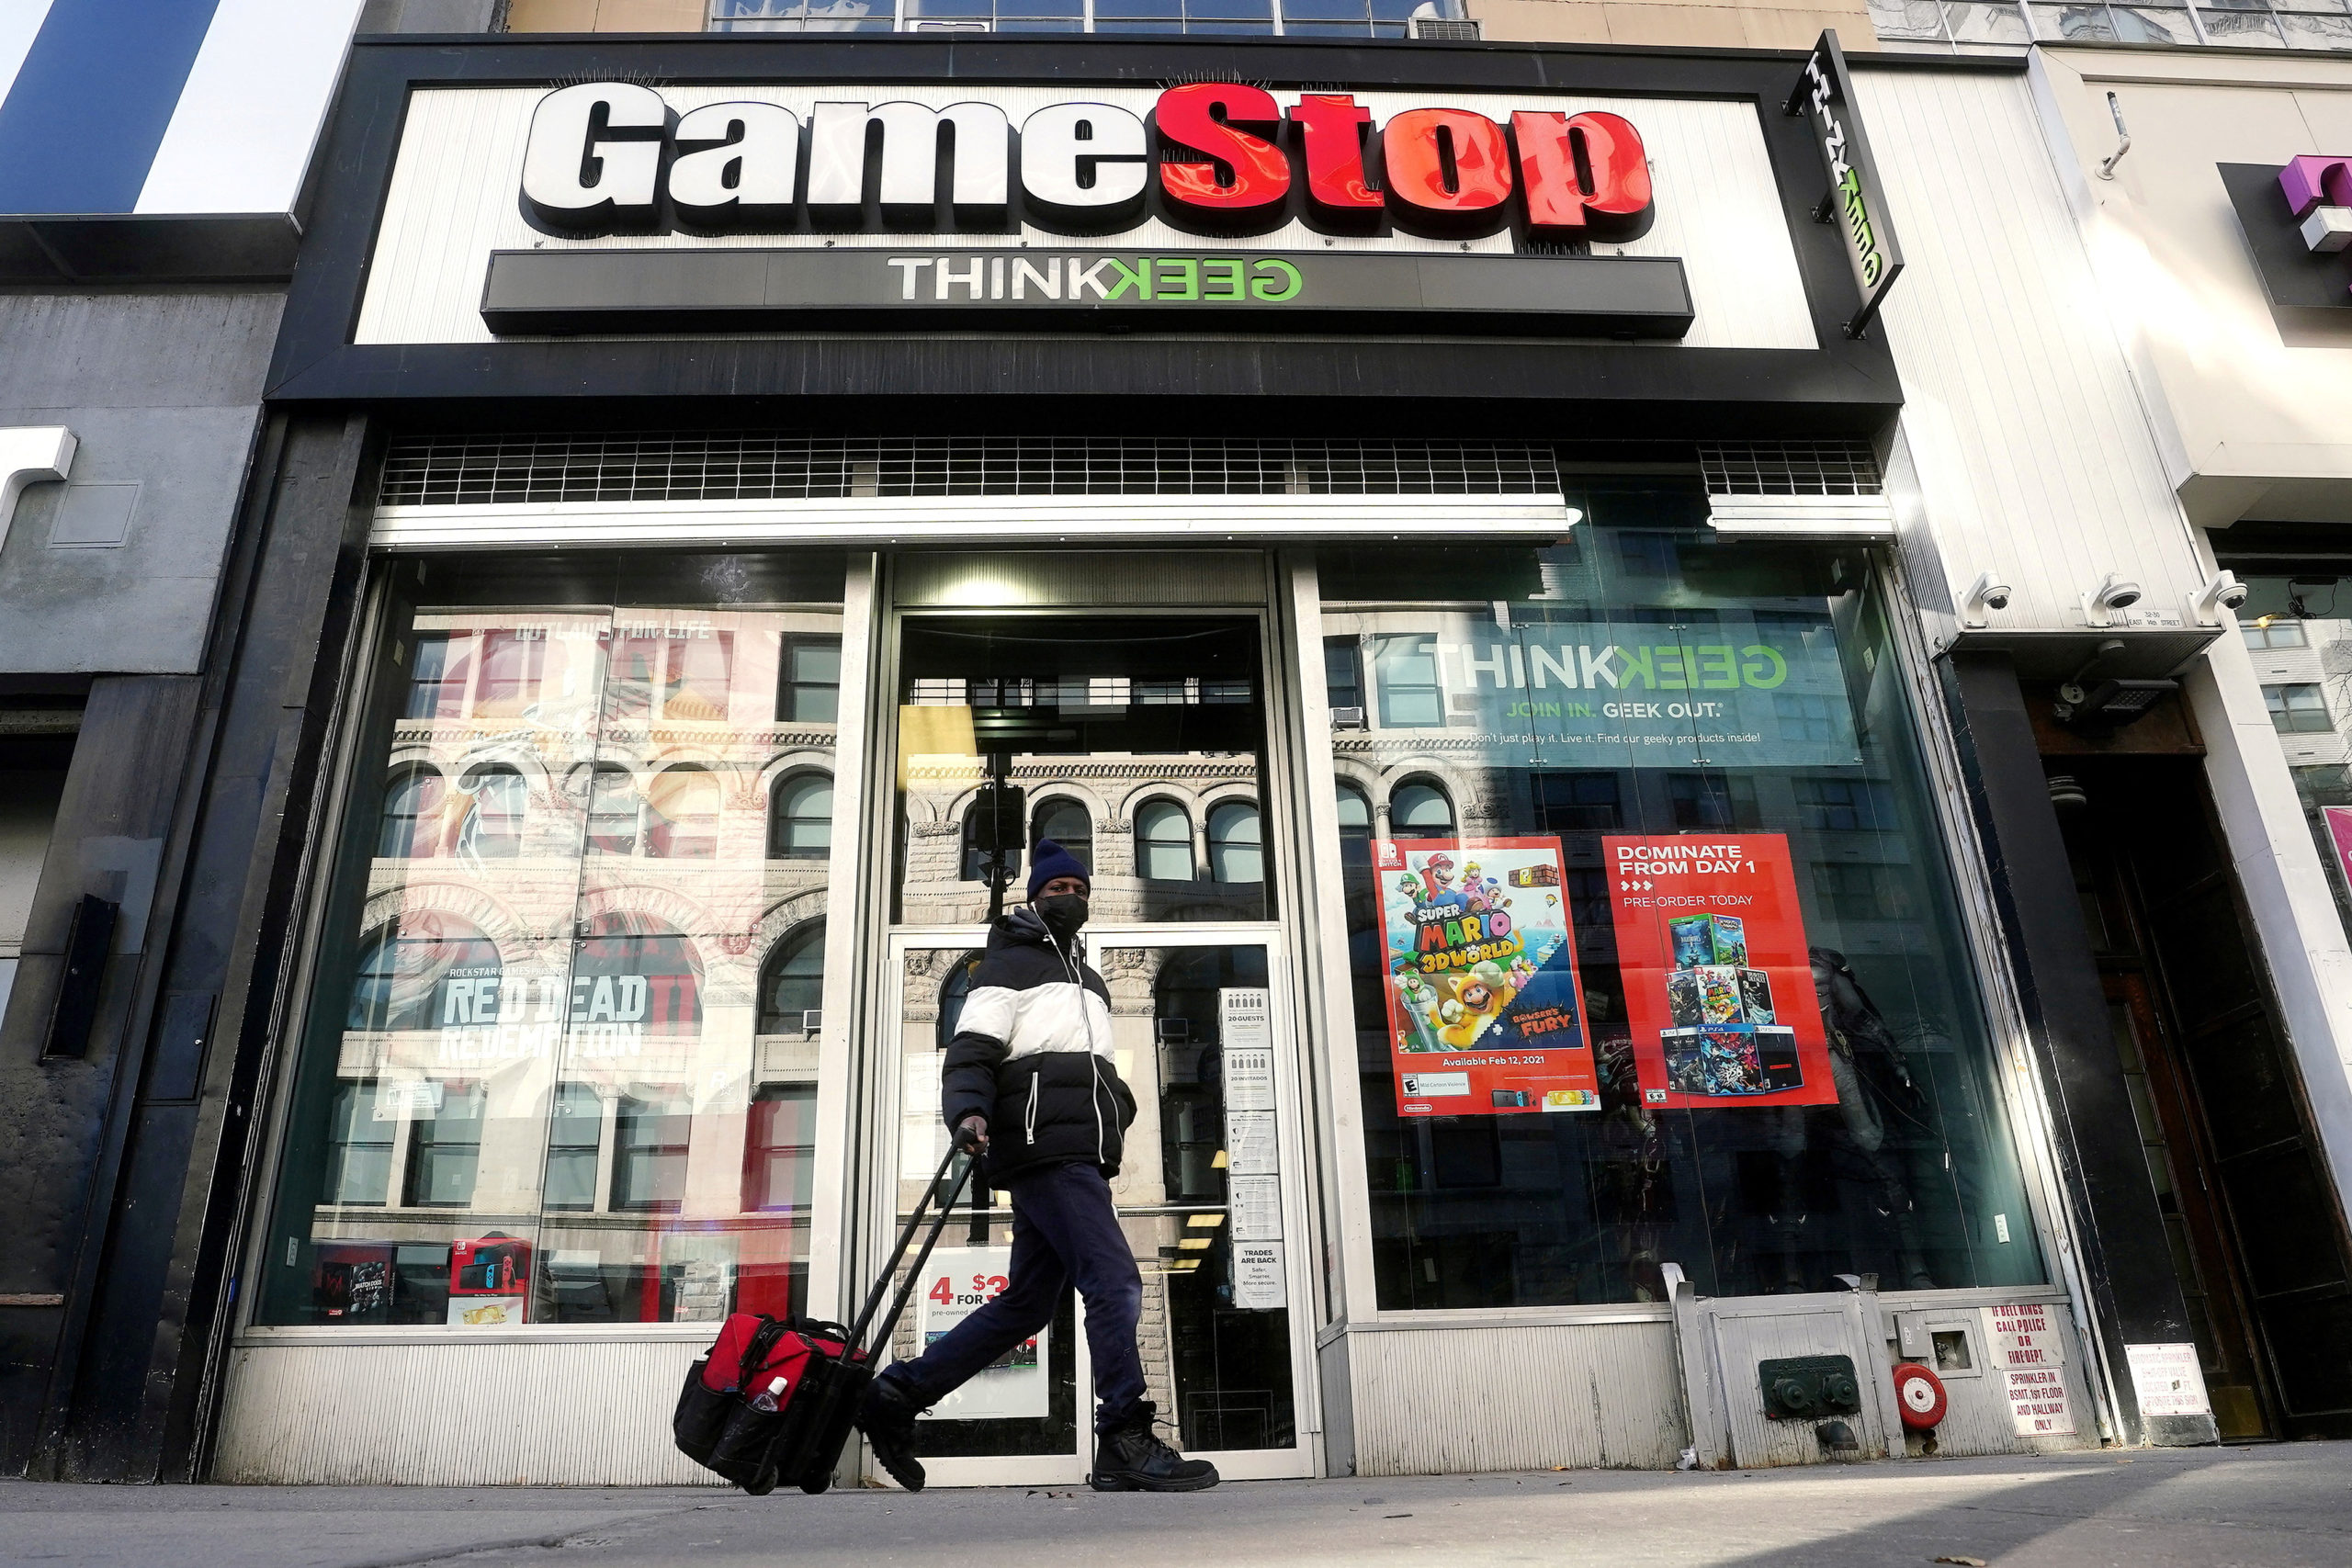 GameStop Corp has terminated its chief financial officer, sending shares of the video game retailer down 8% in extended trading.